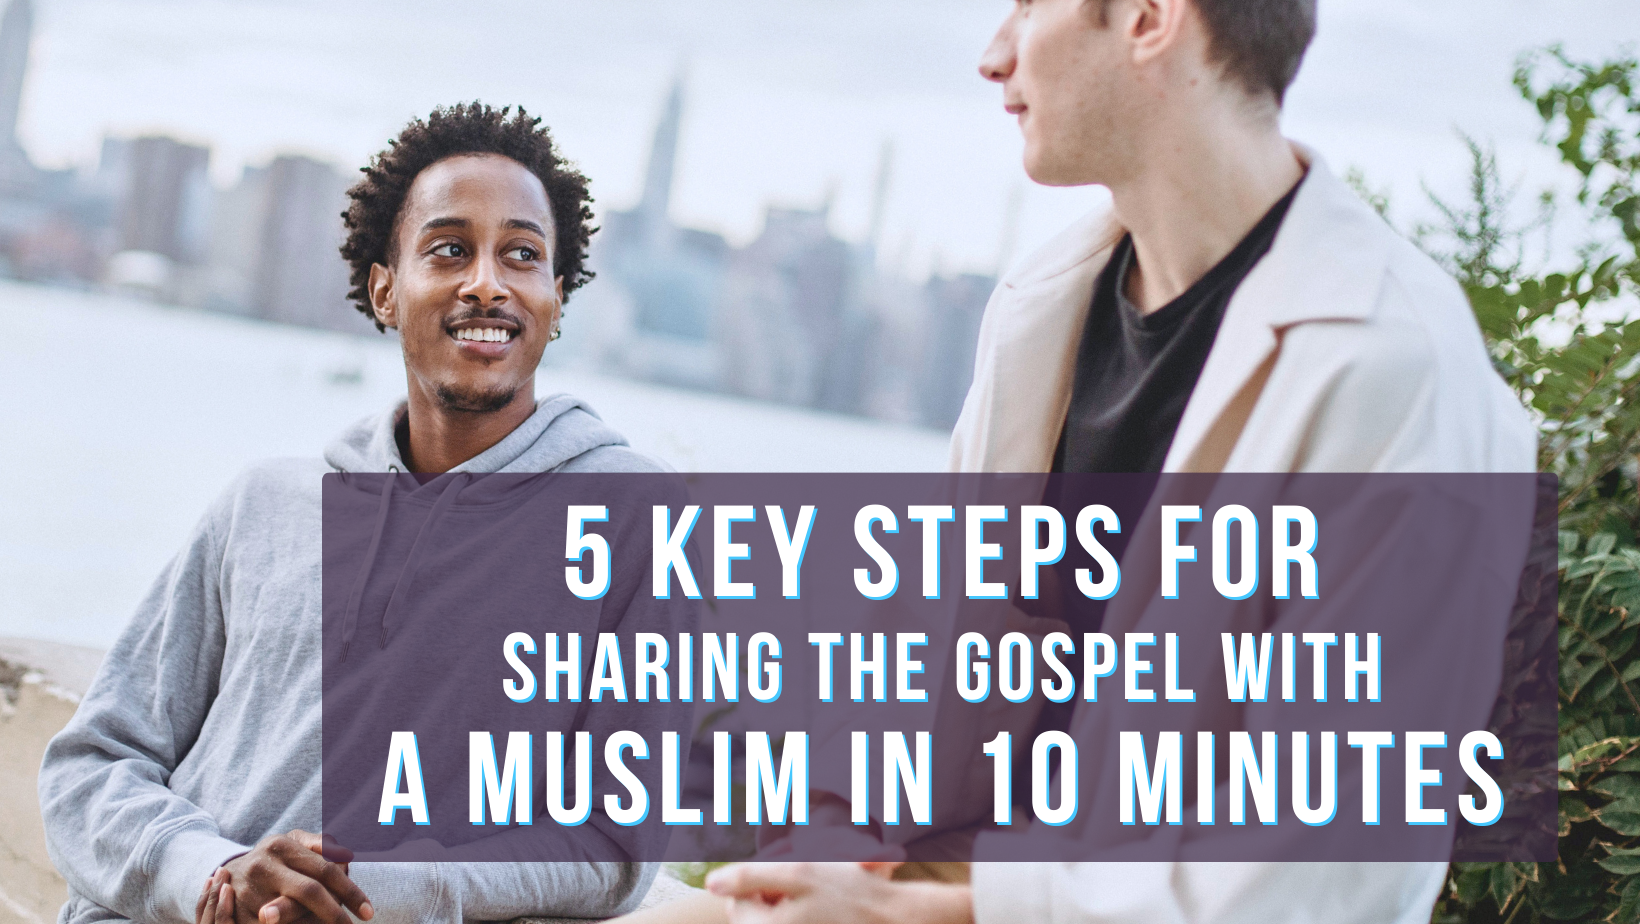 How to share the gospel with a Muslim in 10 minutes